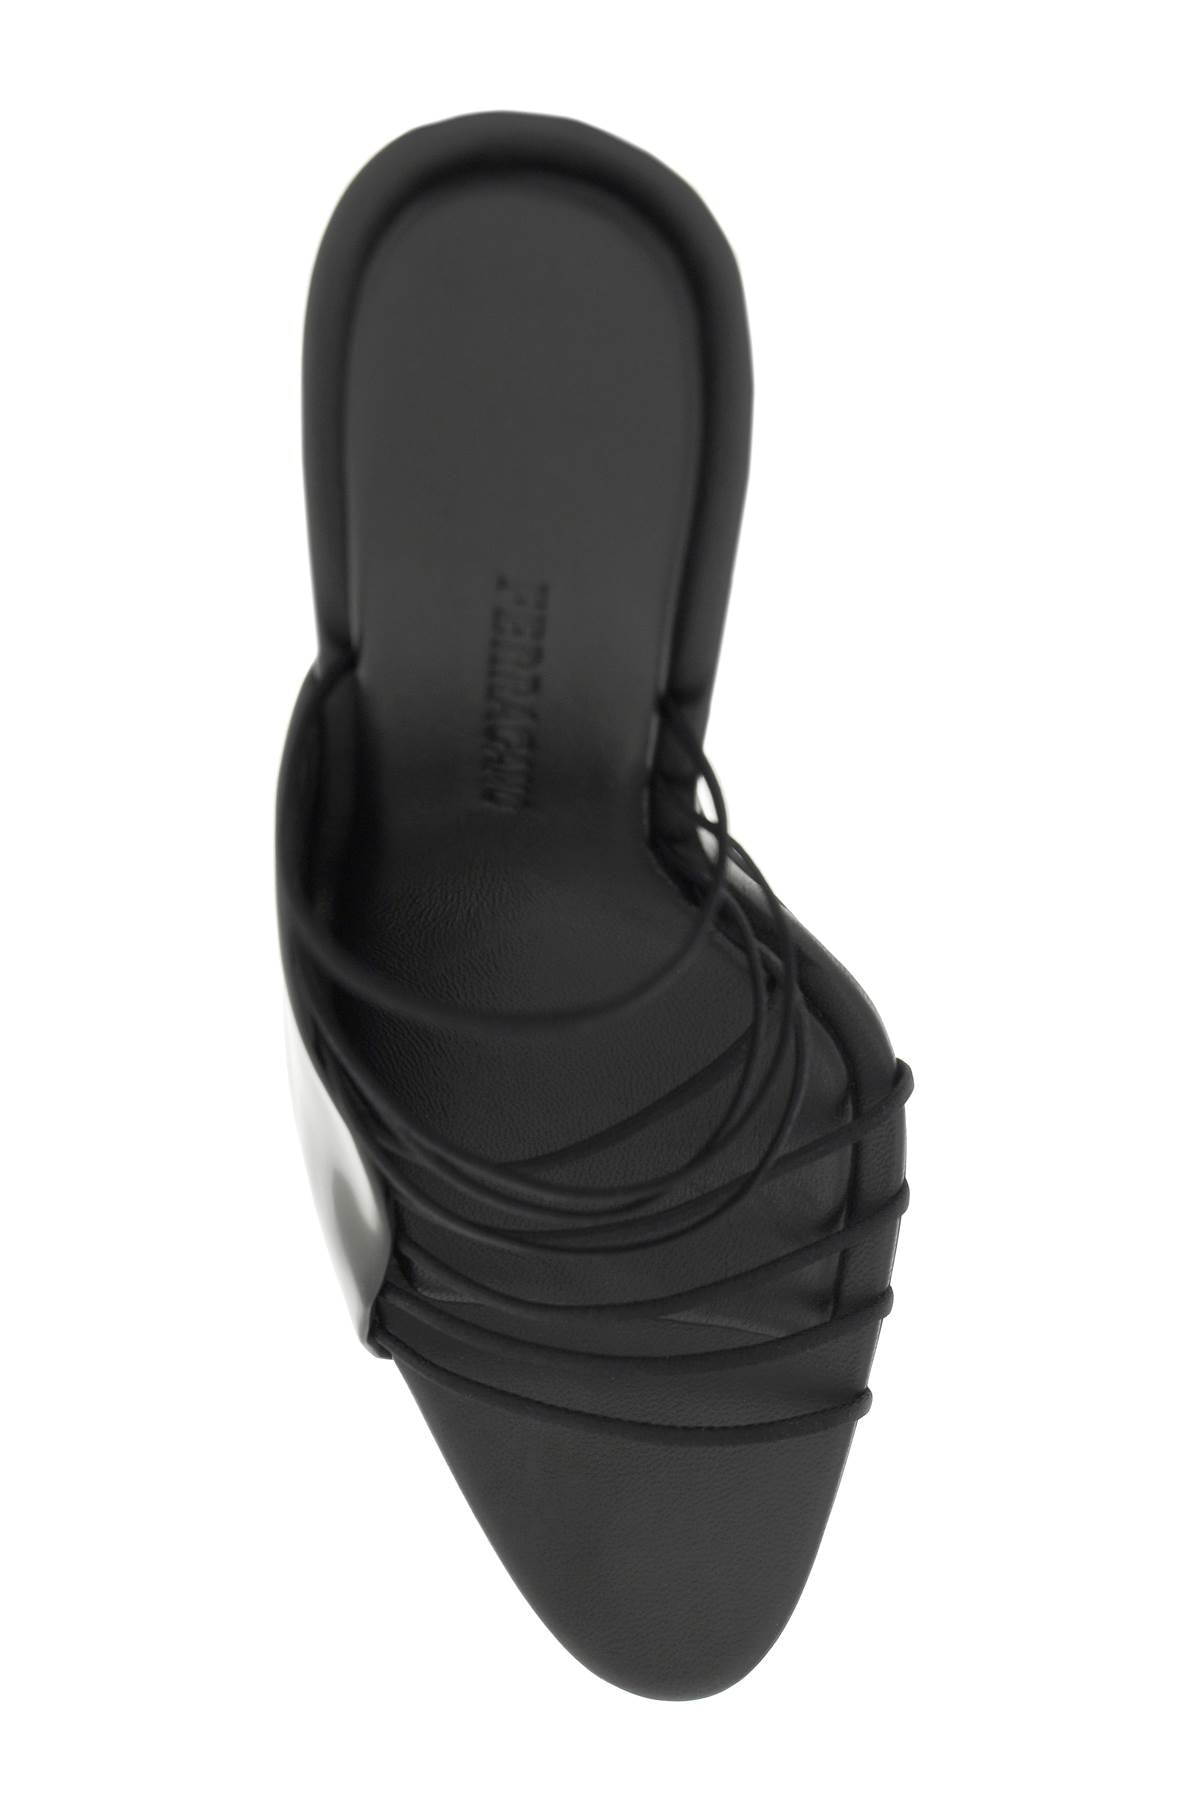 FERRAGAMO Ultra-Fine Strapped Leather Sandals for Sophisticated Women